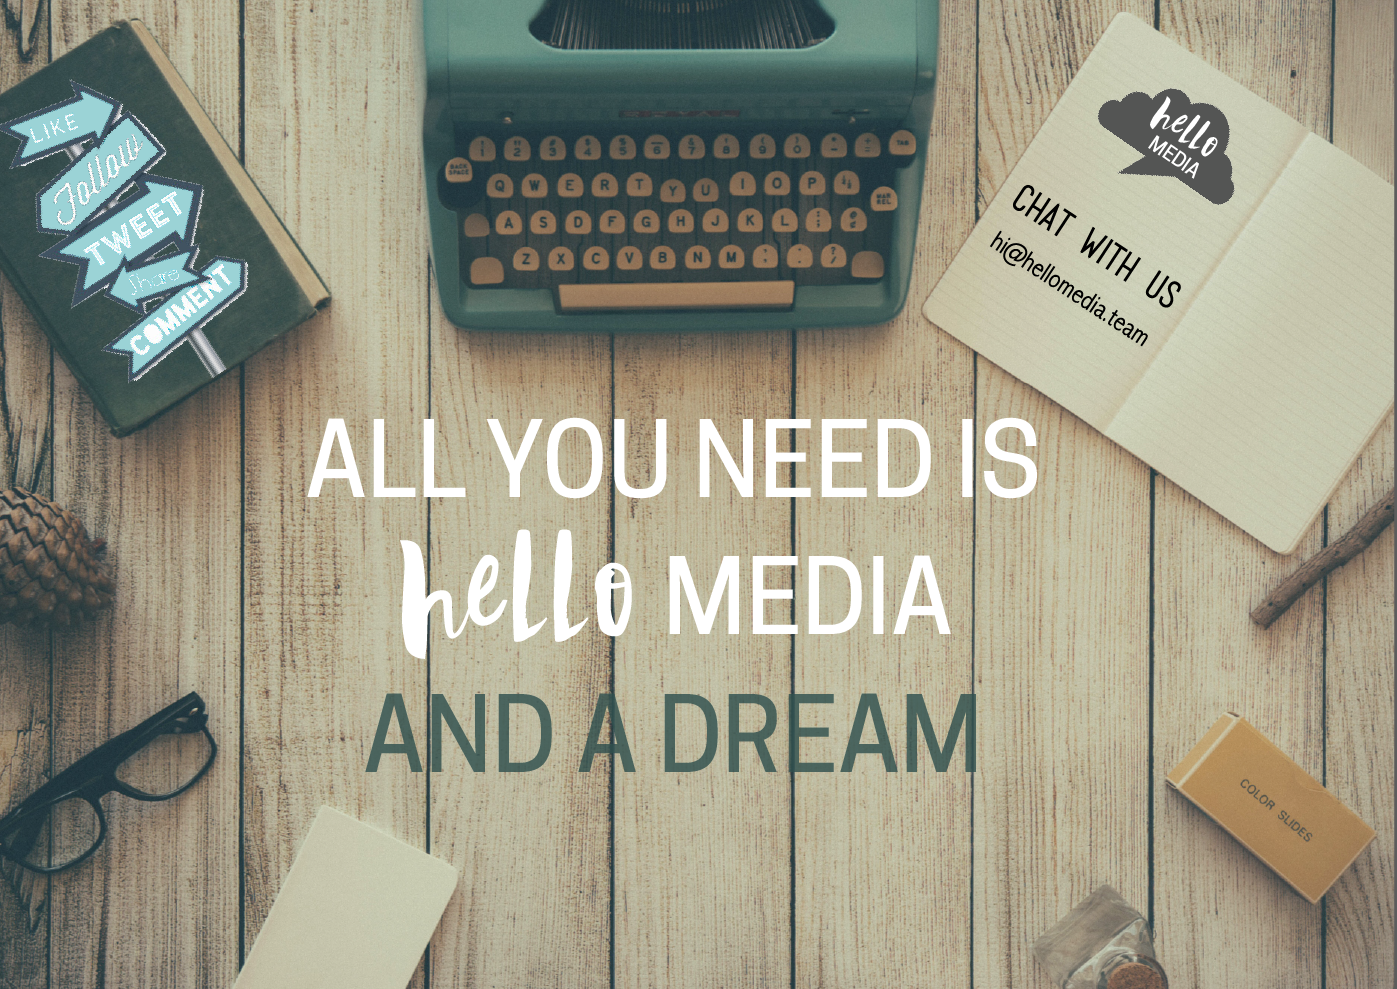 All you need is hello media and a dream to help your business grow